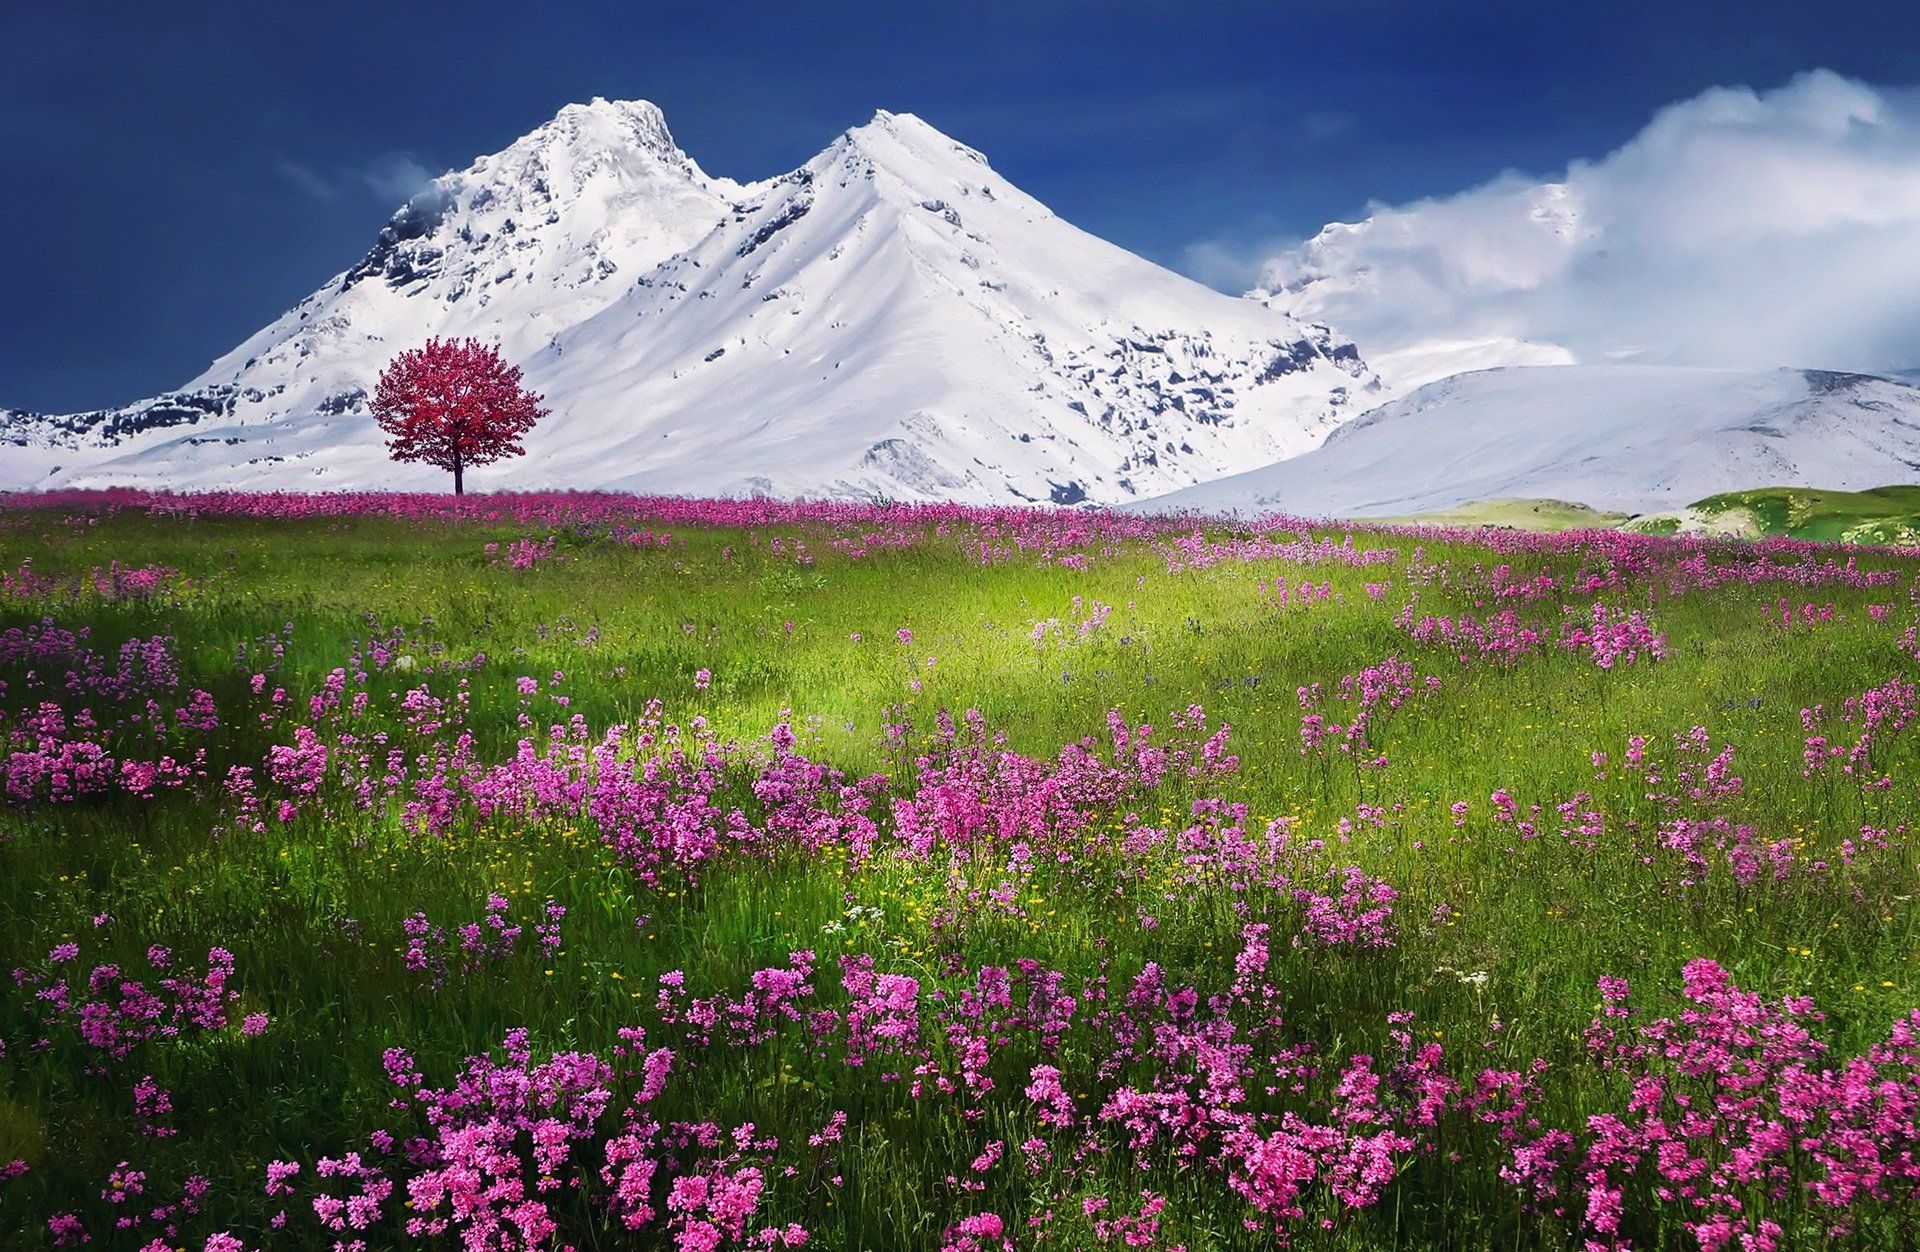 a field of pink flowers with a snowy mountain in the background